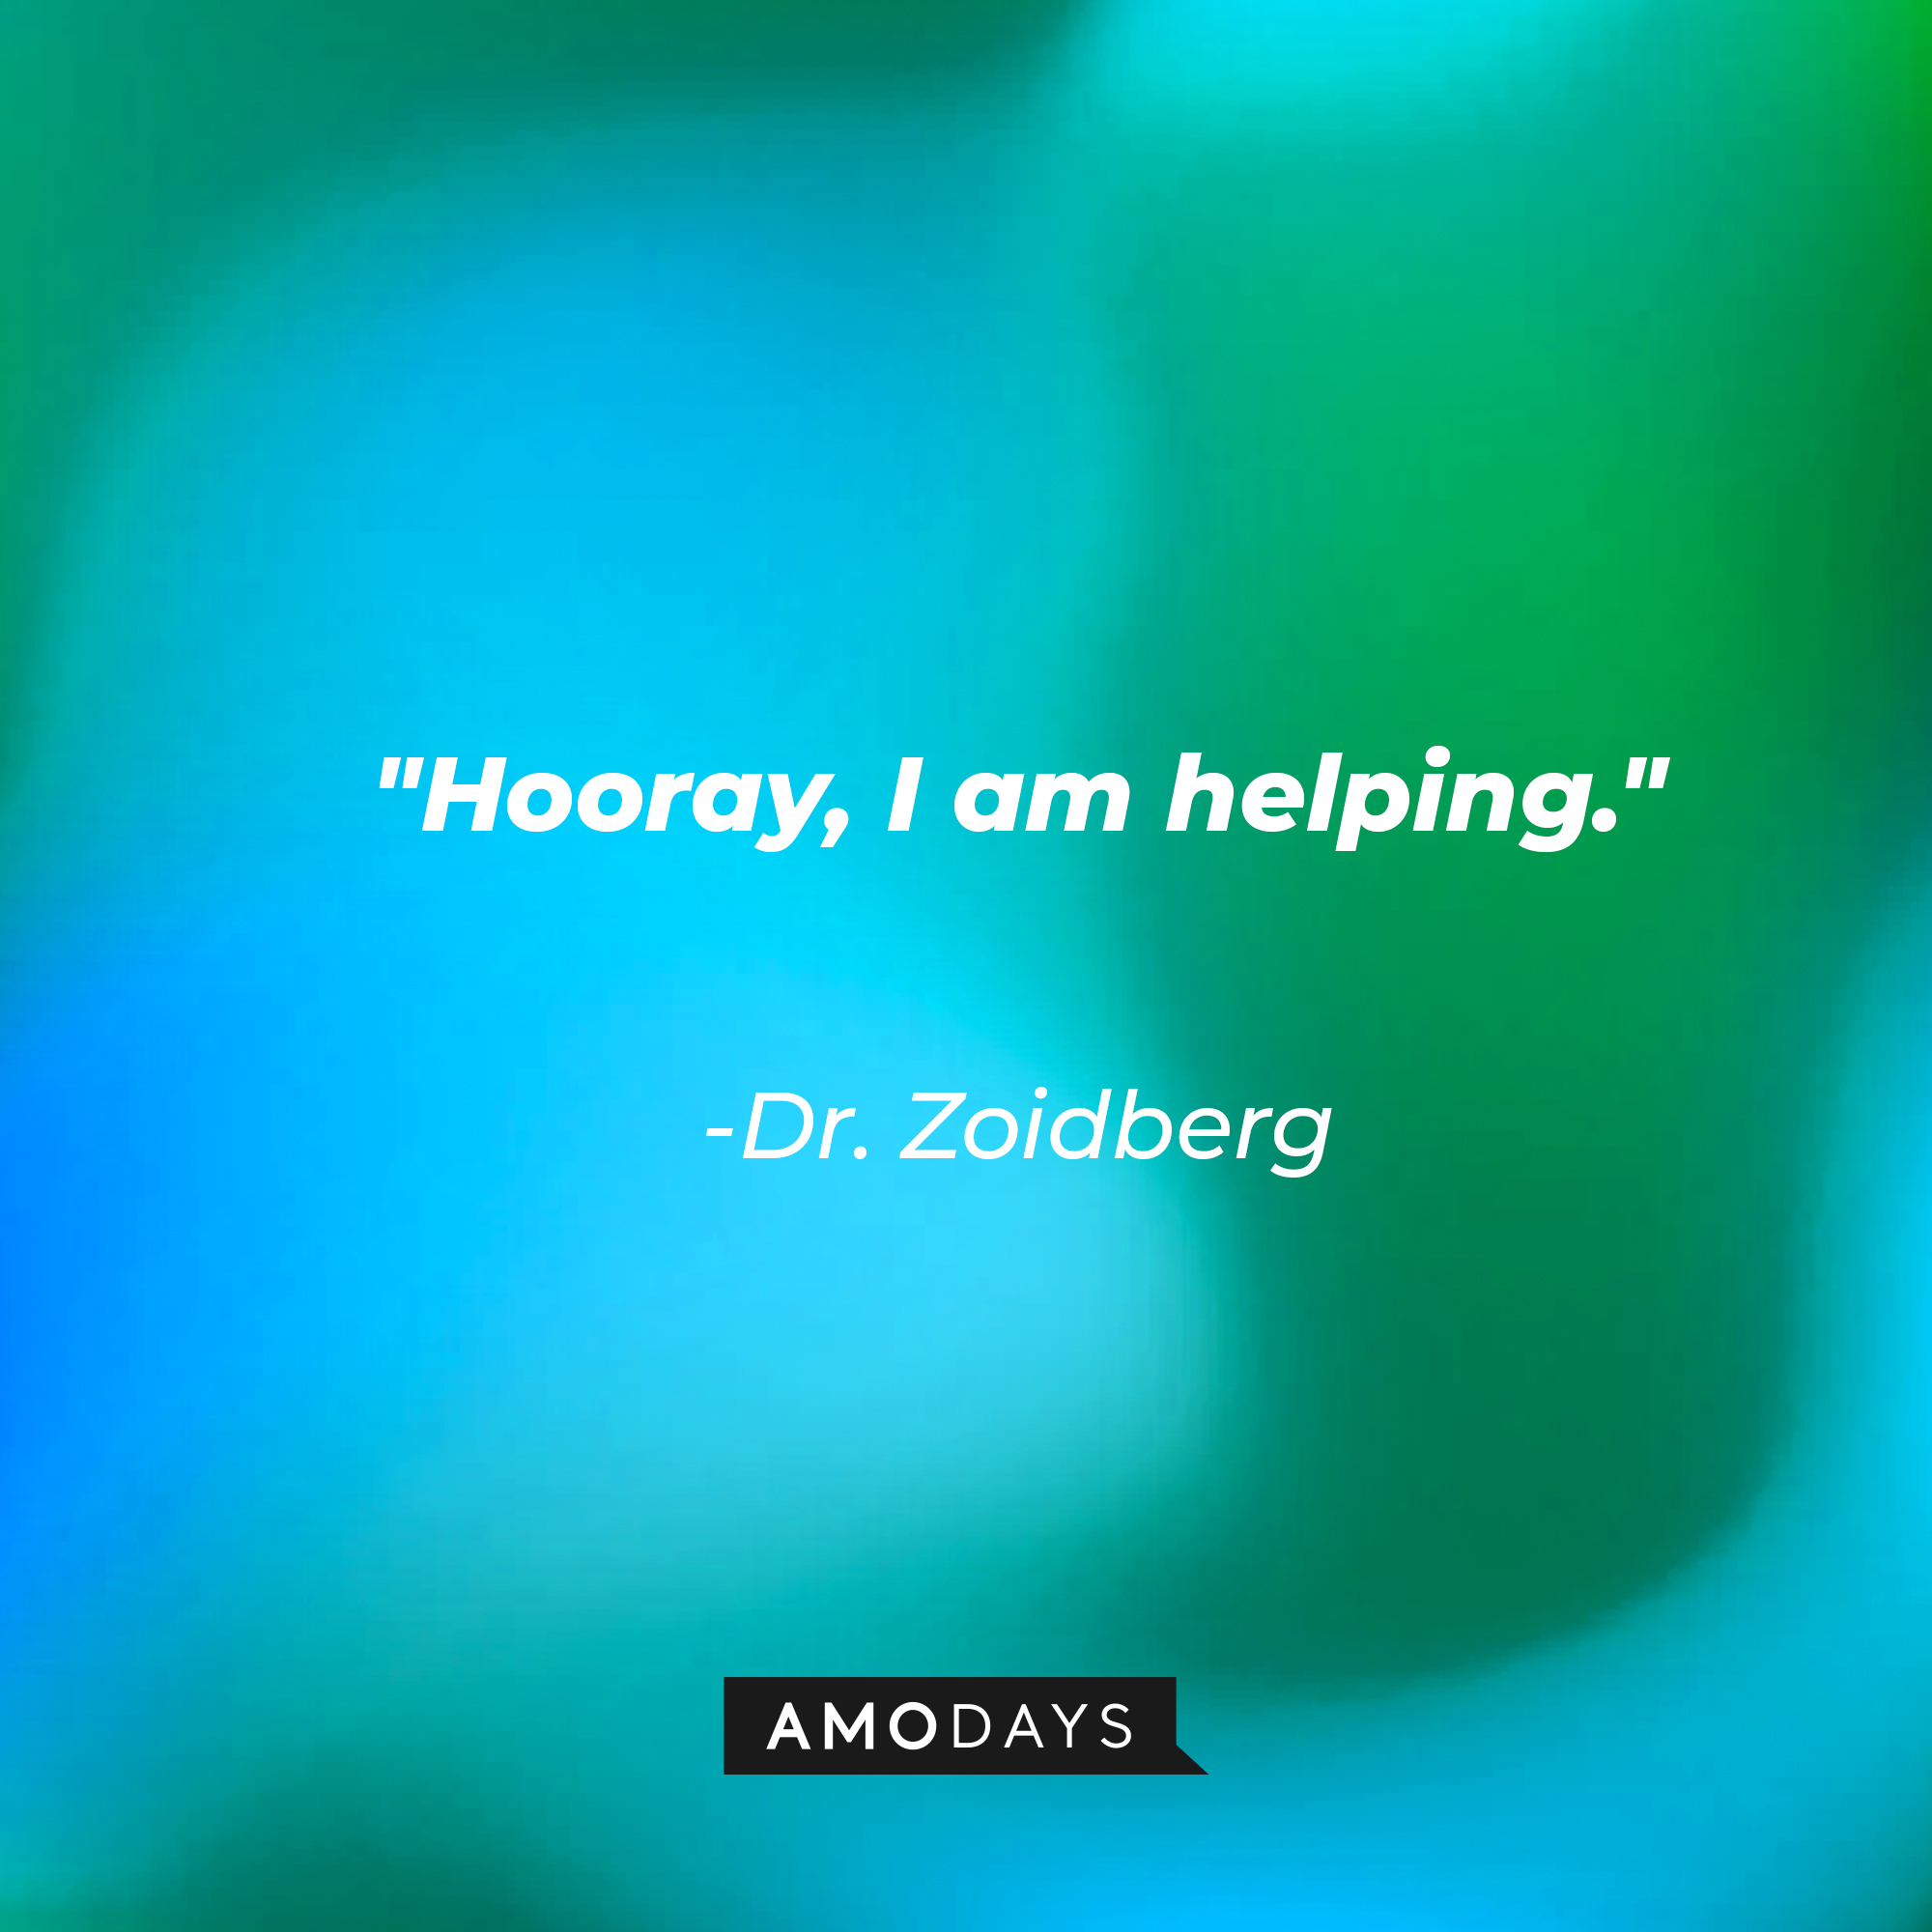 Dr. Zoidberg's quote: "Hooray, I am helping." | Source: AmoDays